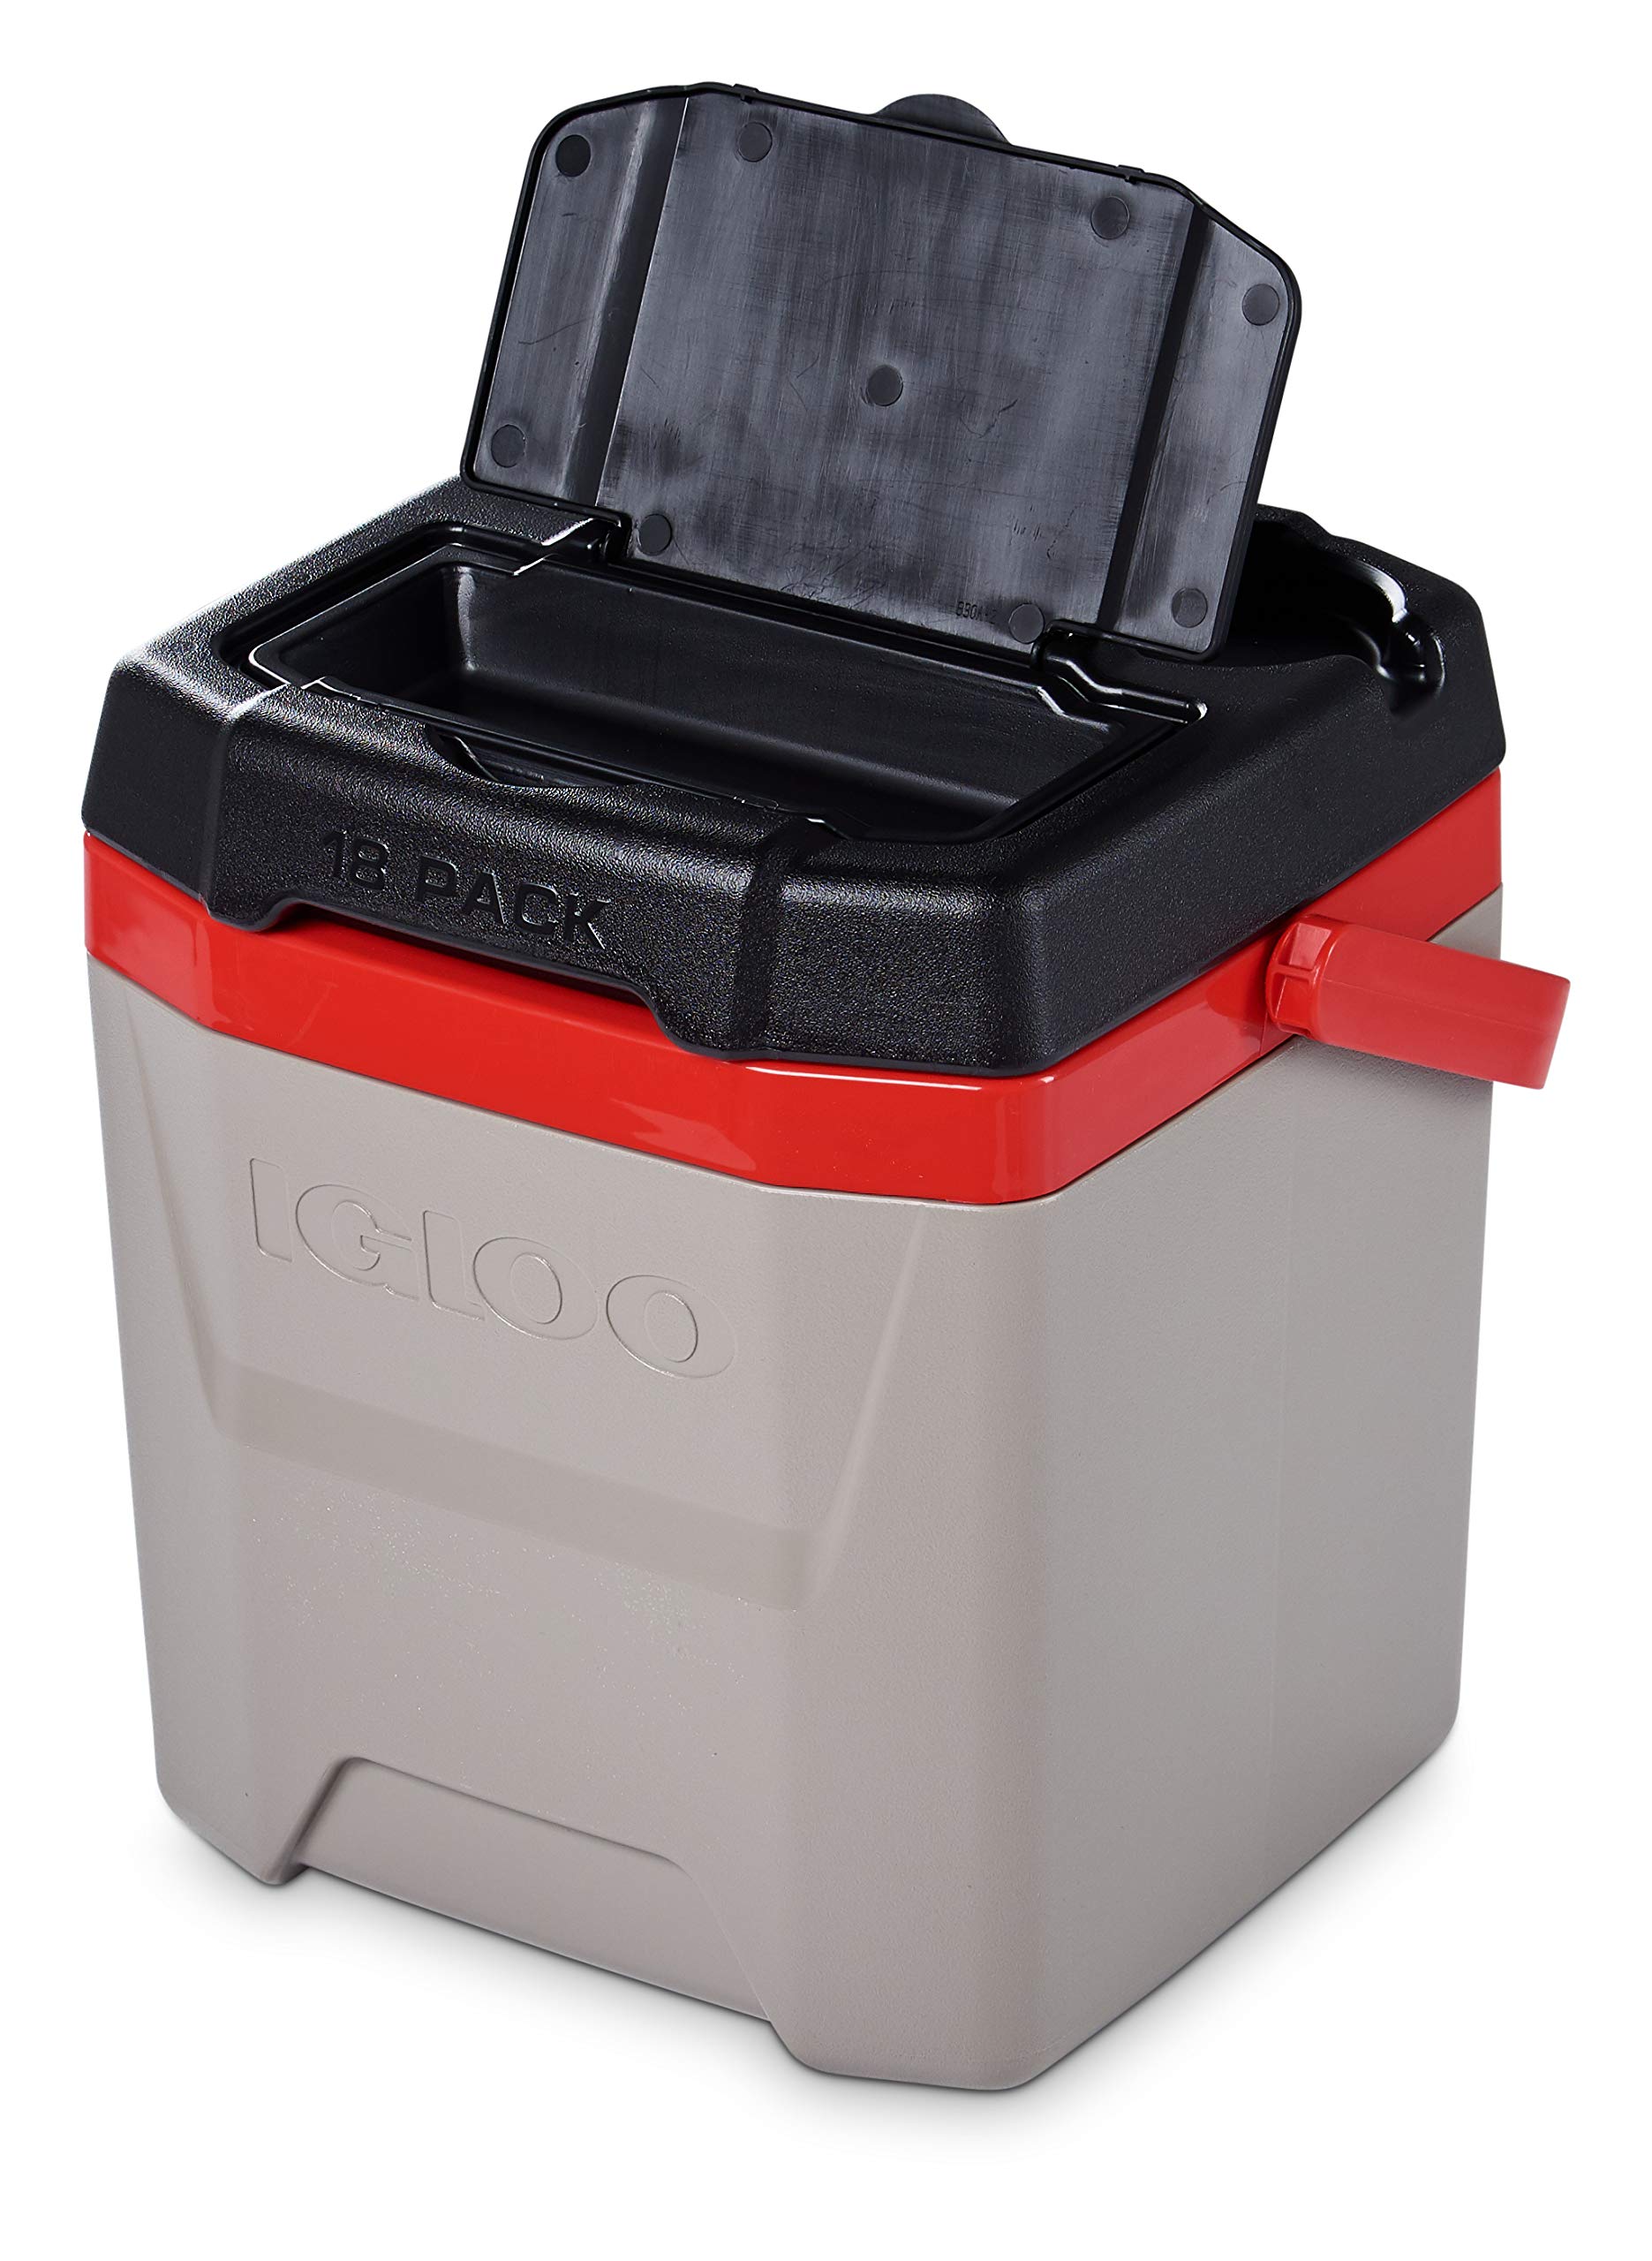 Igloo 12-16 Qt Profile Hardsided Insulated Lunch Cooler